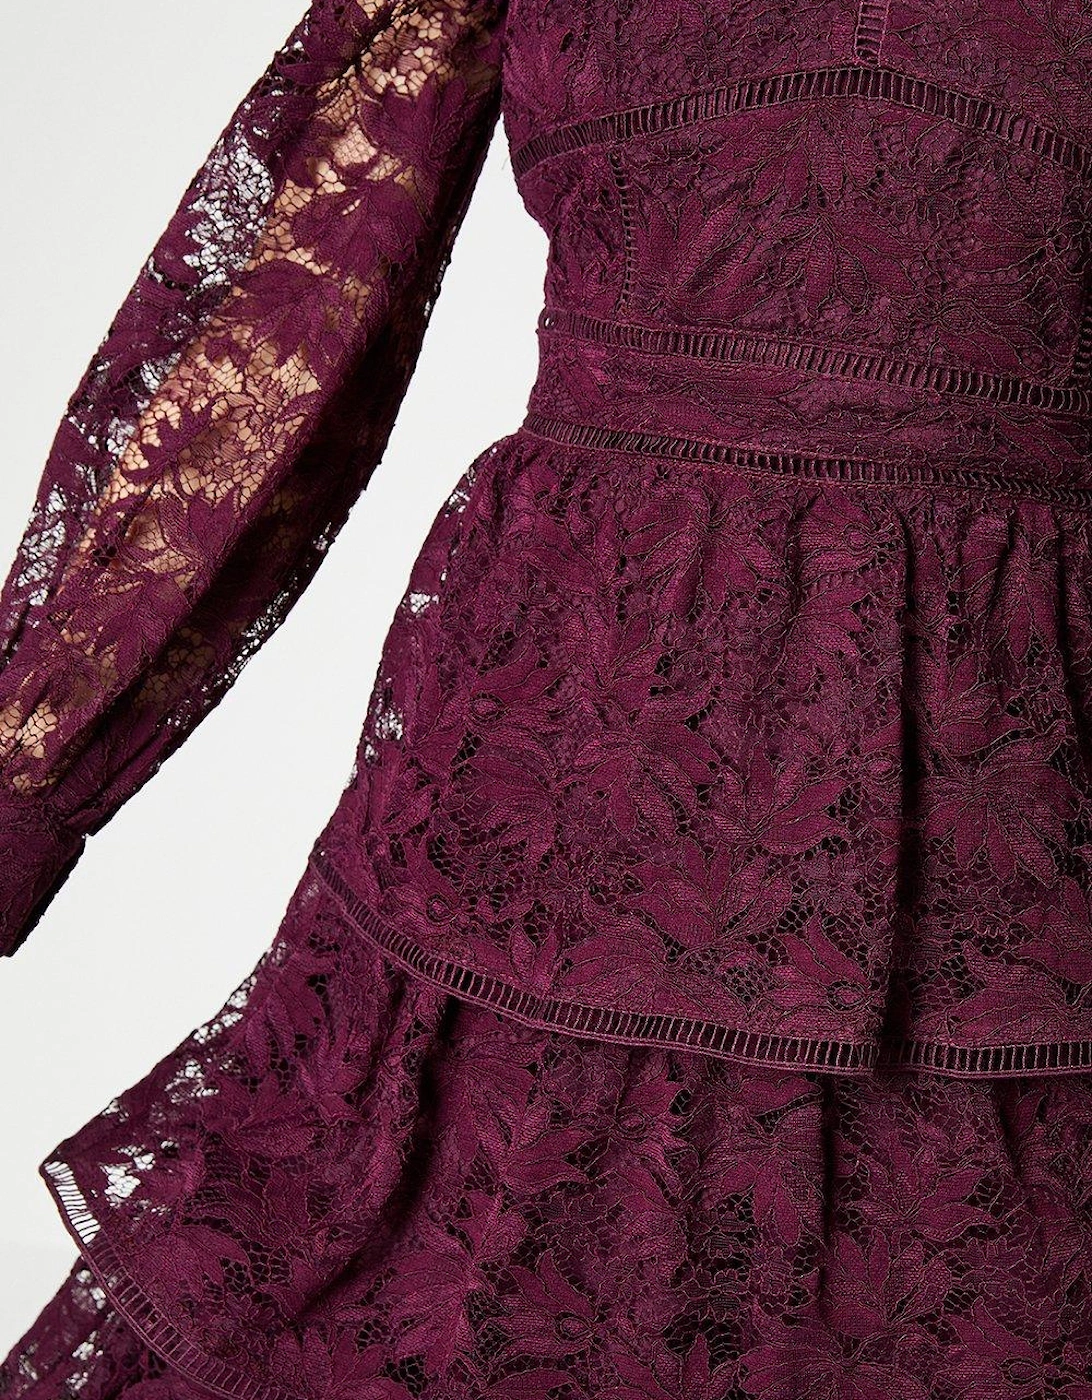 Tiered Lace Dress With Long Sleeve